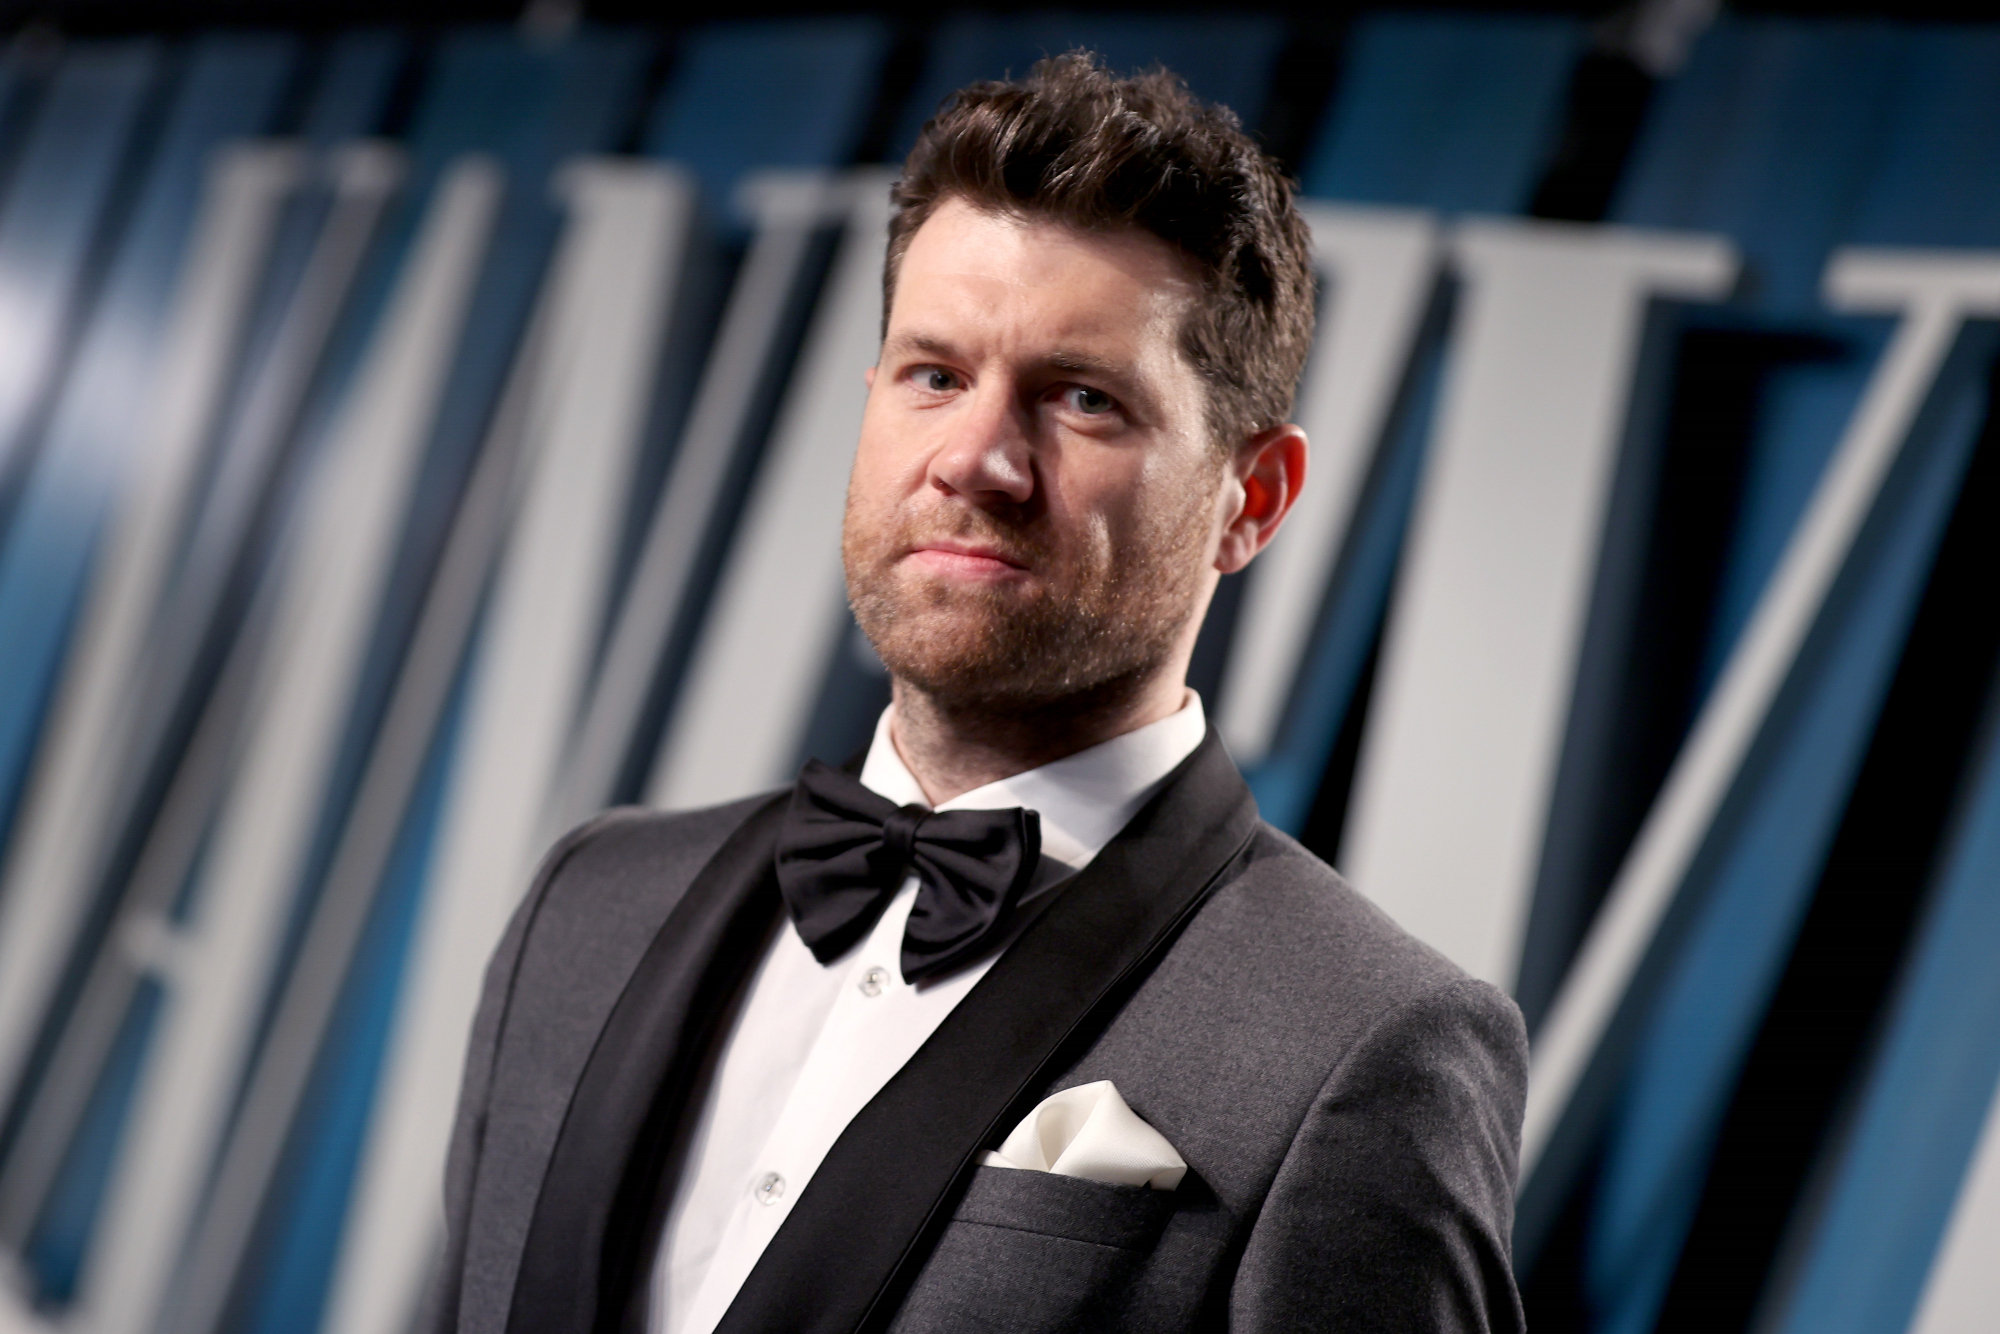 'Bros' actor and co-writer Billy Eichner at the 2020 Vanity Fair Oscar Party wearing a gray and black tuxedo